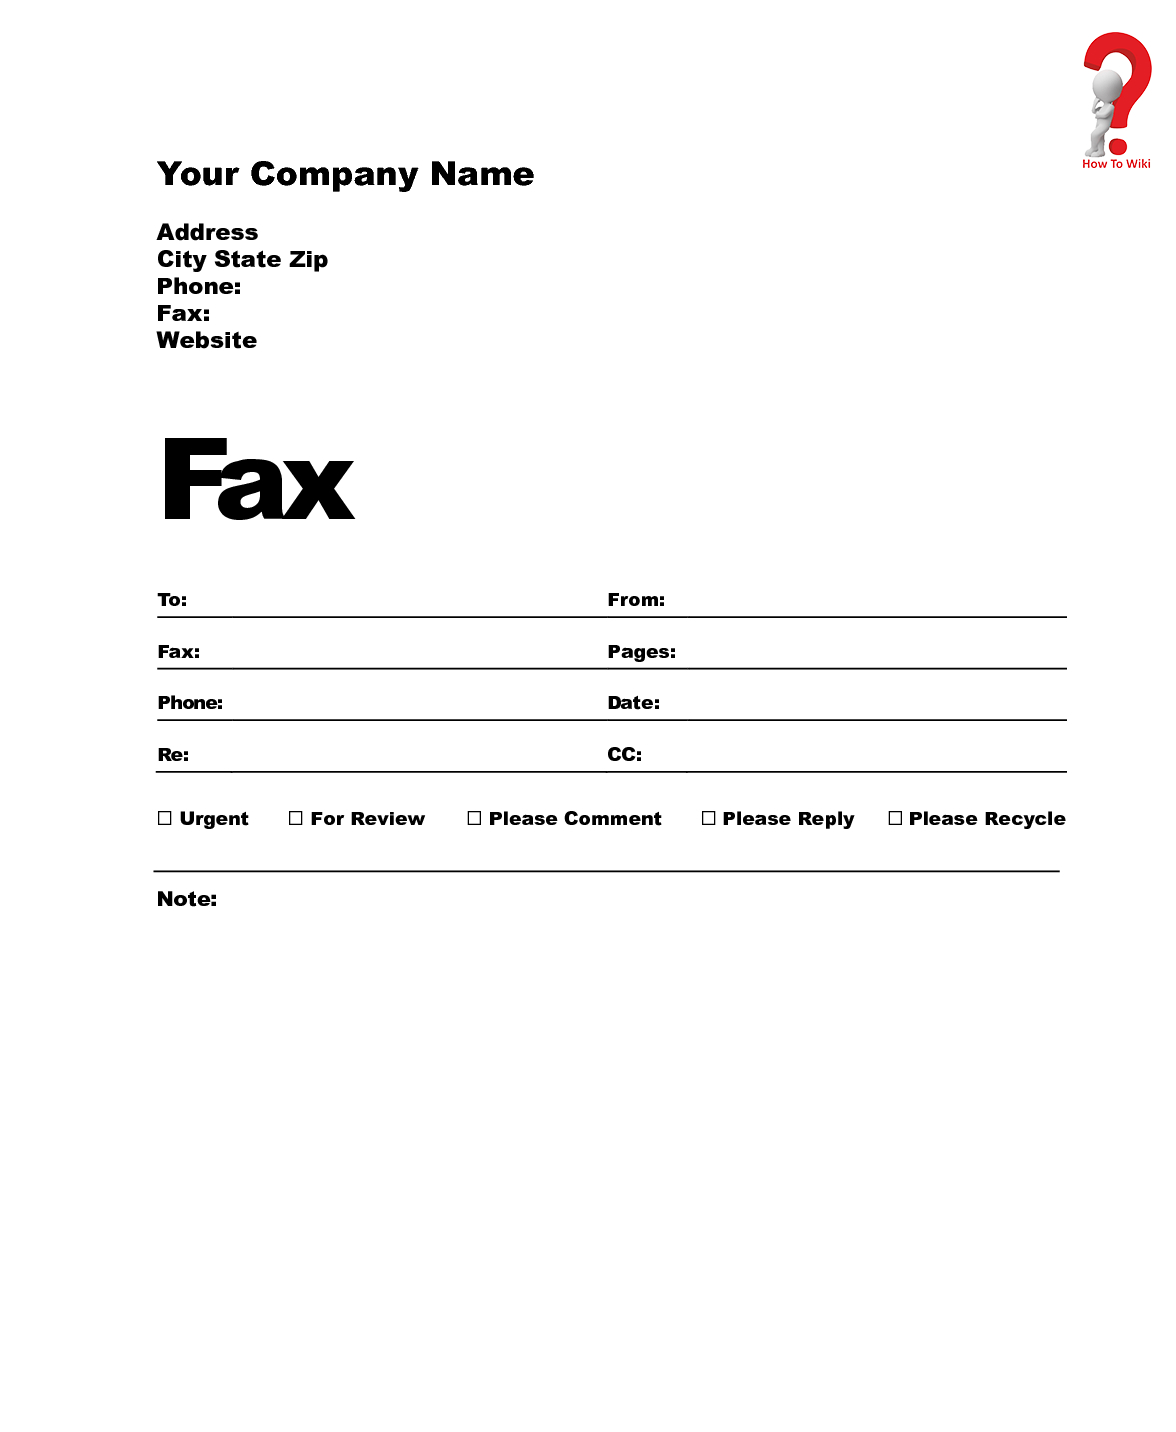 How To Write Professional Fax Cover Sheet - Full Guide | How For Fax Cover Sheet Template Word 2010